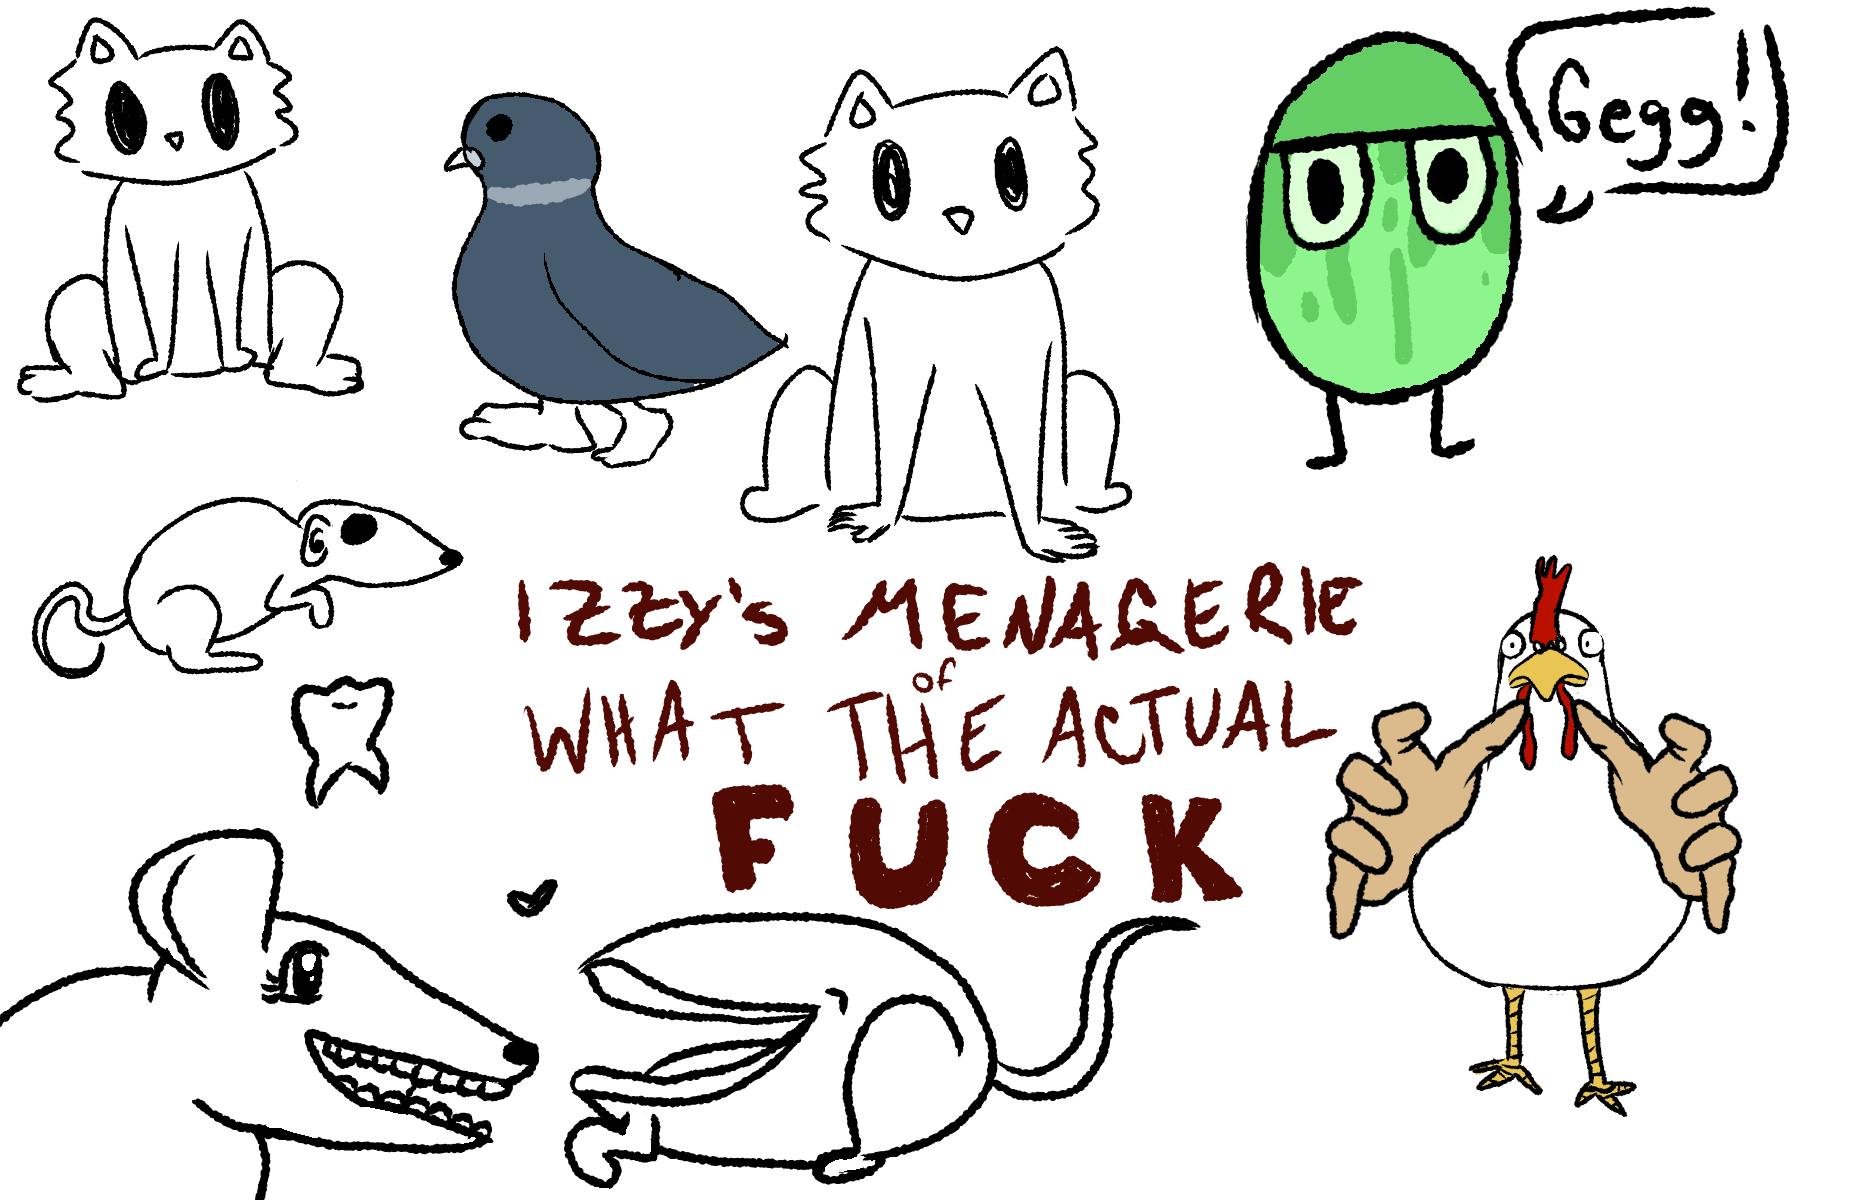 A digital drawing of a series of animals with human features. In the middle of the canvas, it says 'Izzy's Menagerie of What The Actual FUCK' in red handwriting.